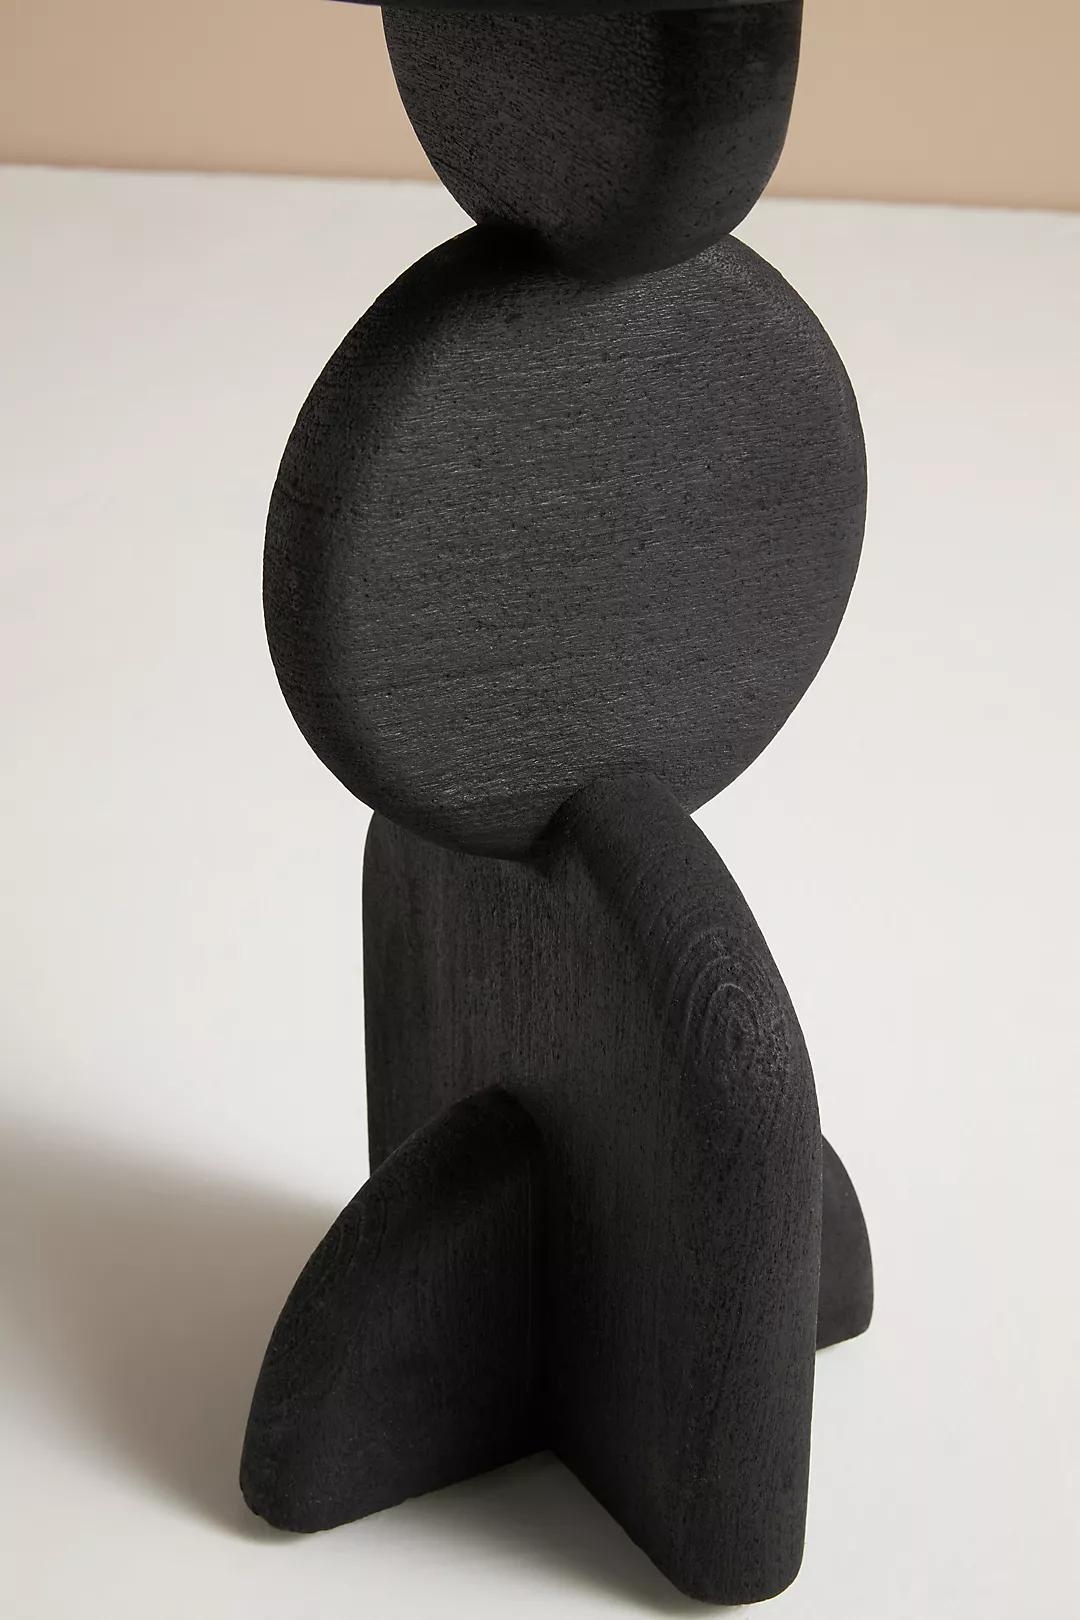 Statuette Side Table - Image 2